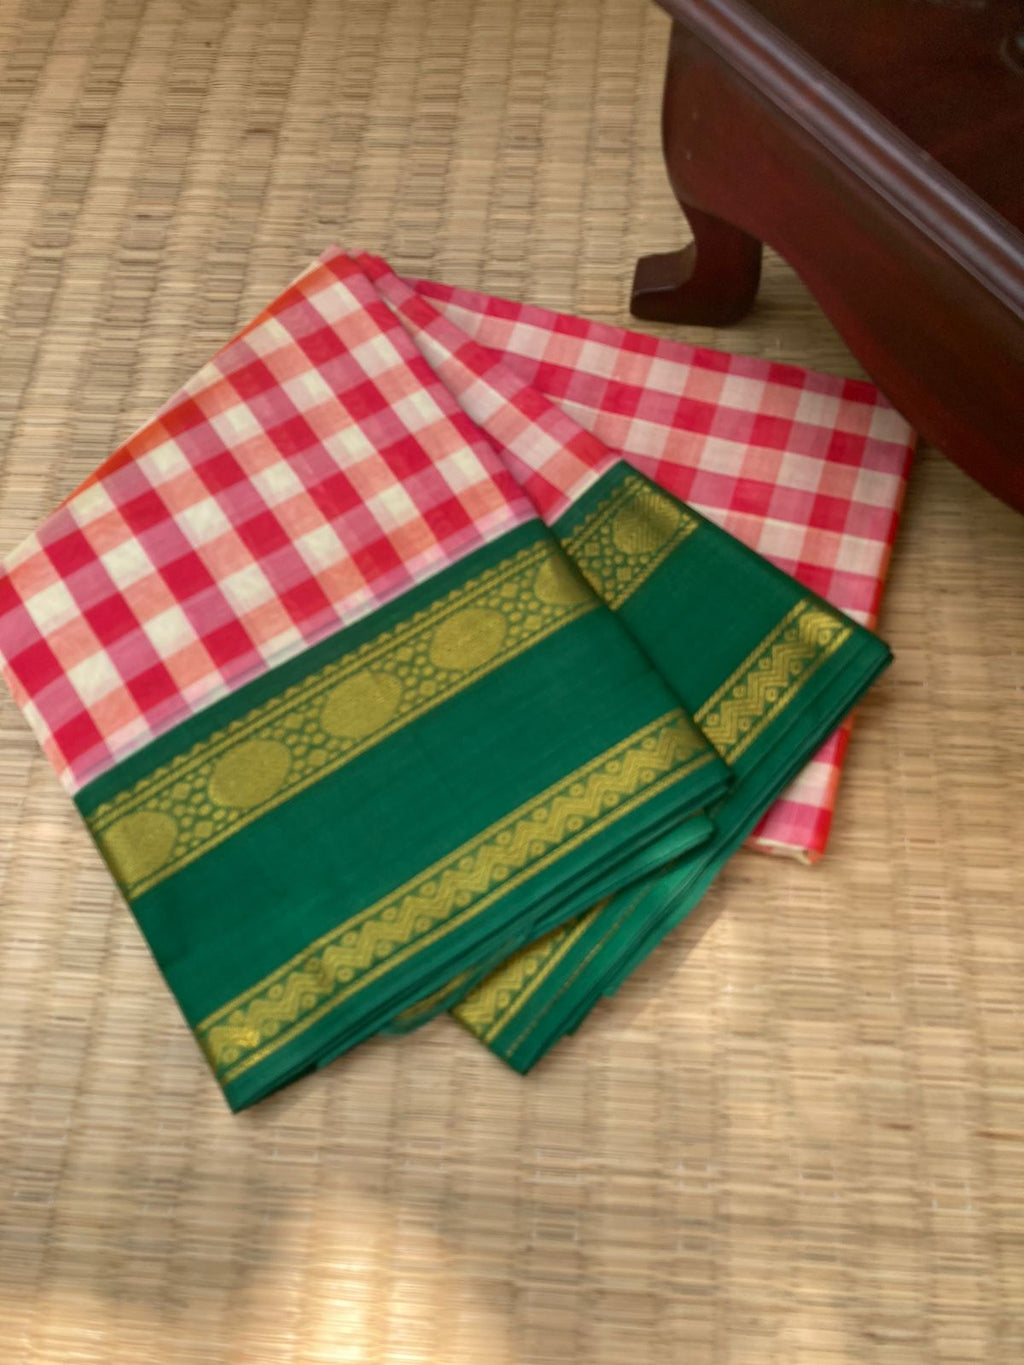 Paalum Palamum Kattams Korvai Silk Cottons - off white and red with green borders